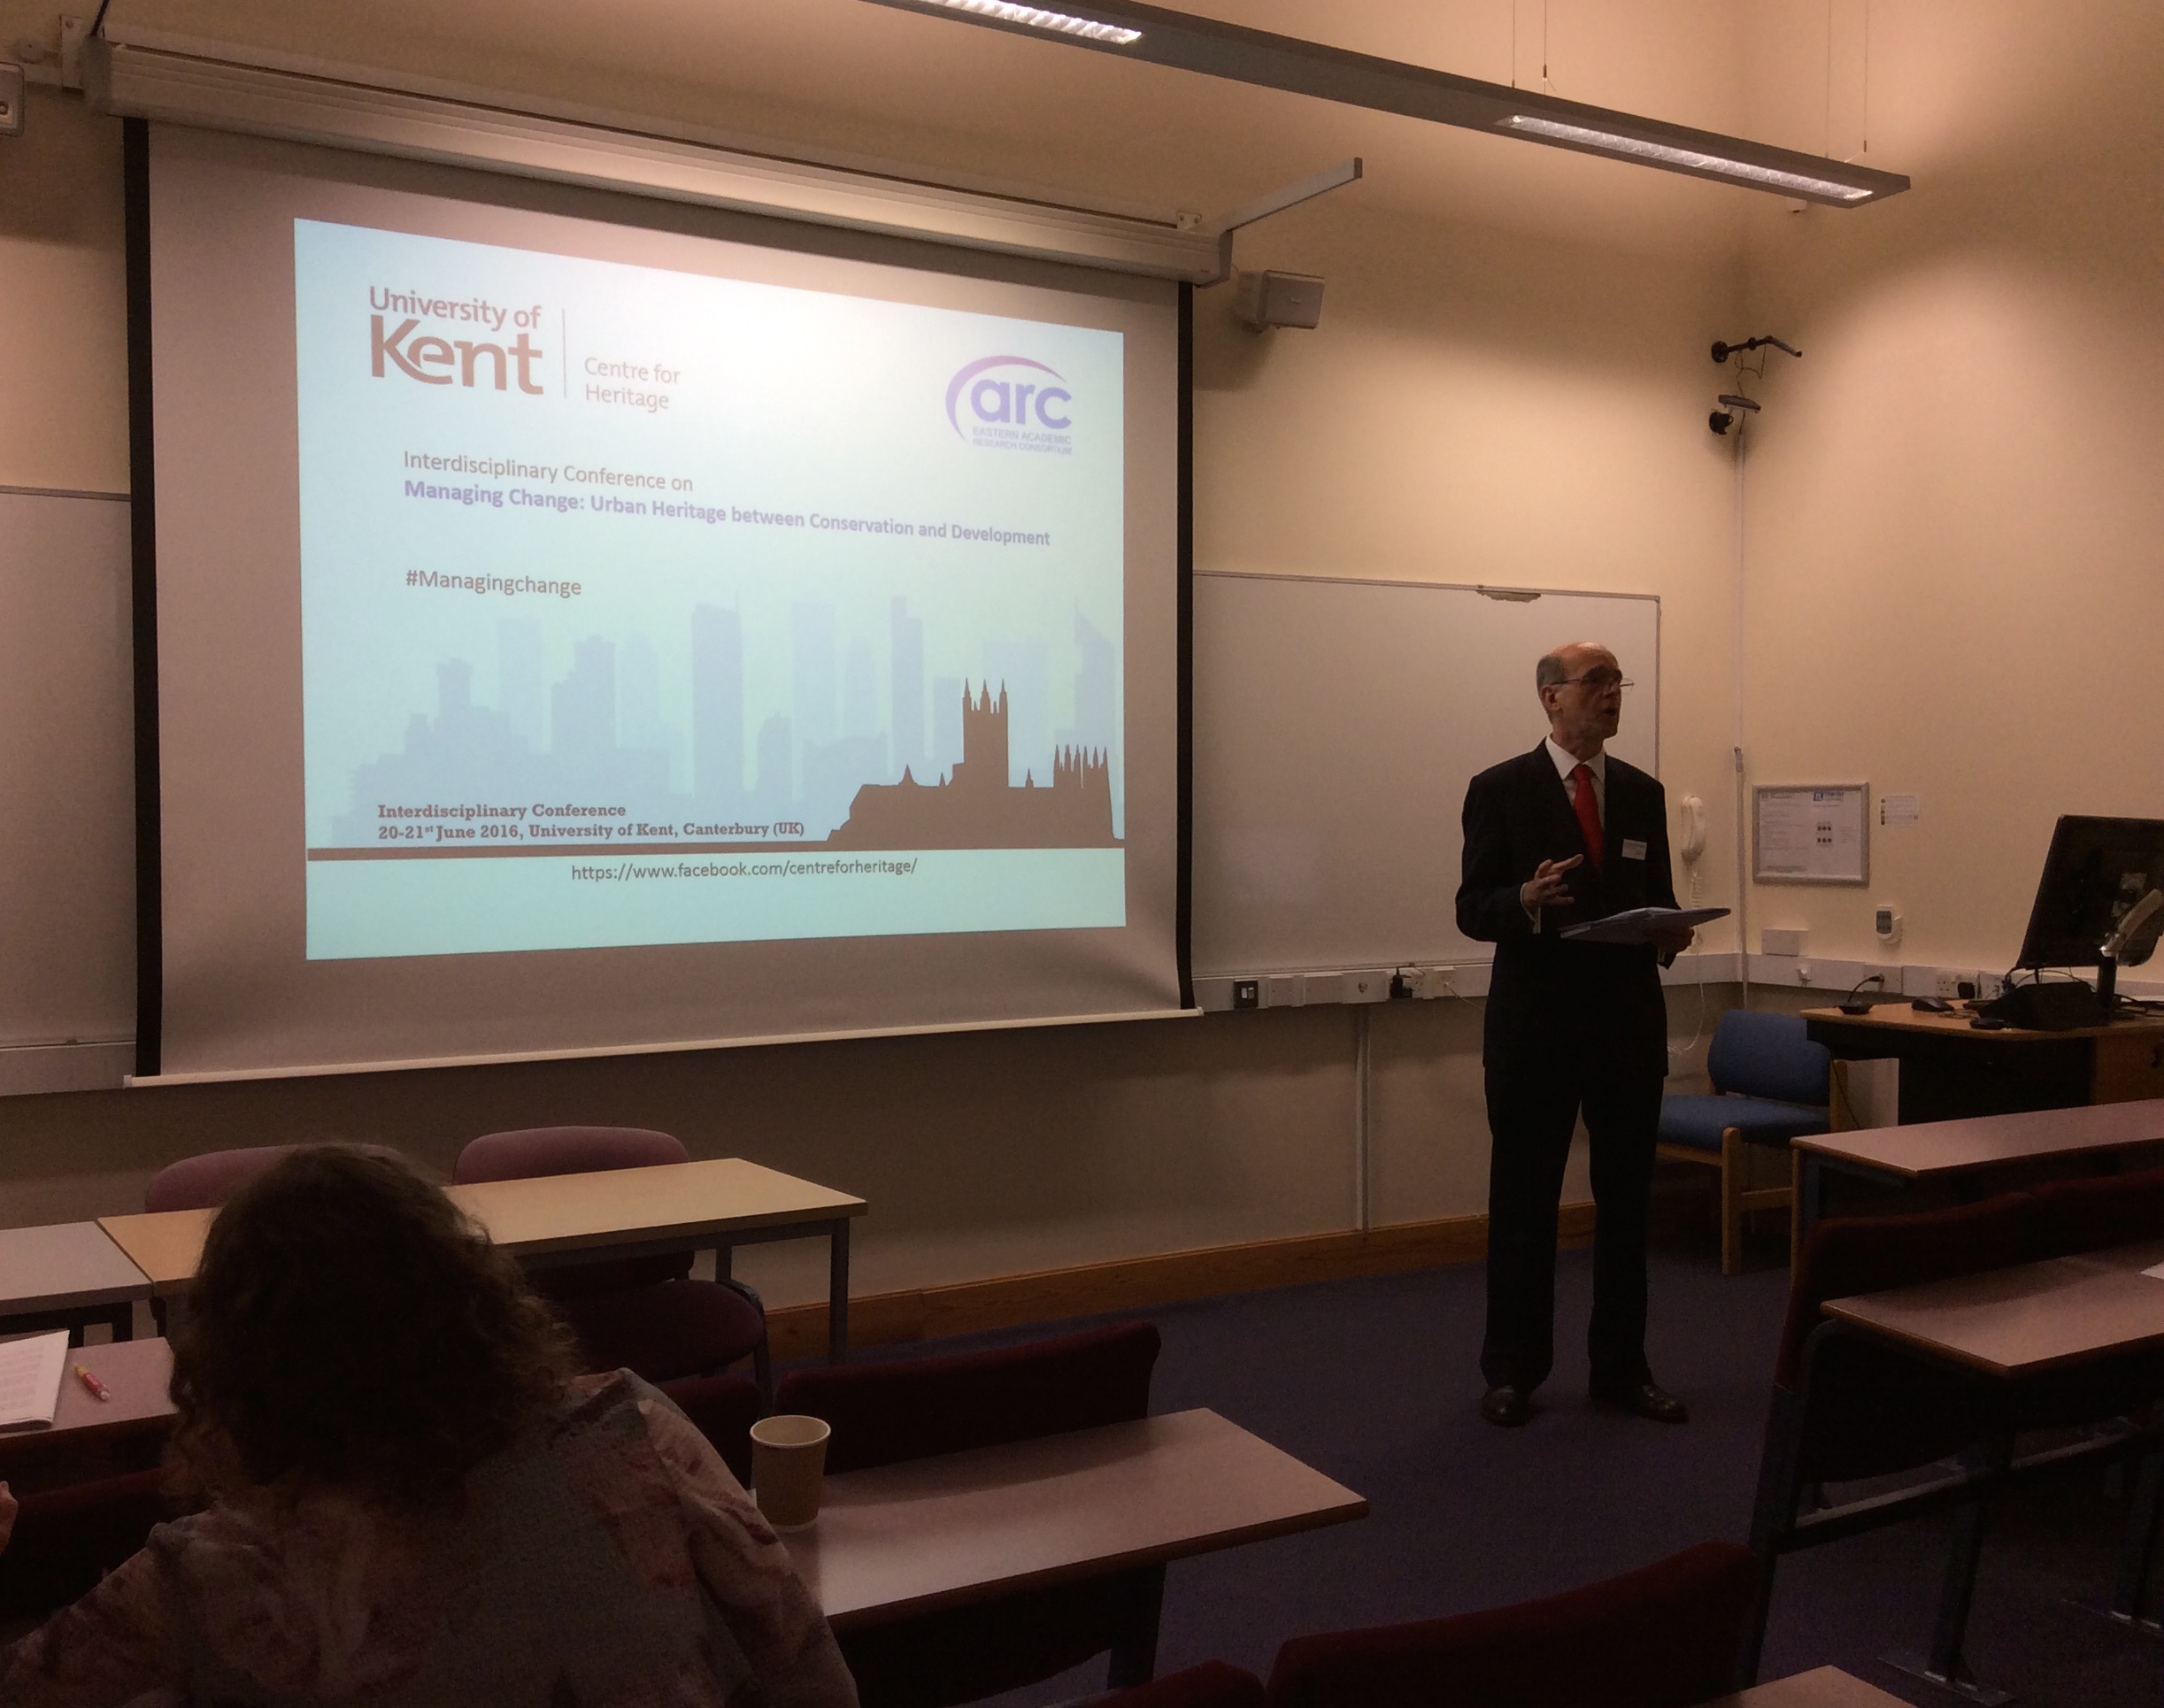 Welcome by Prof Philippe De Wilde, Pro Vice-Chancellor for Research and Innovation, University of Kent